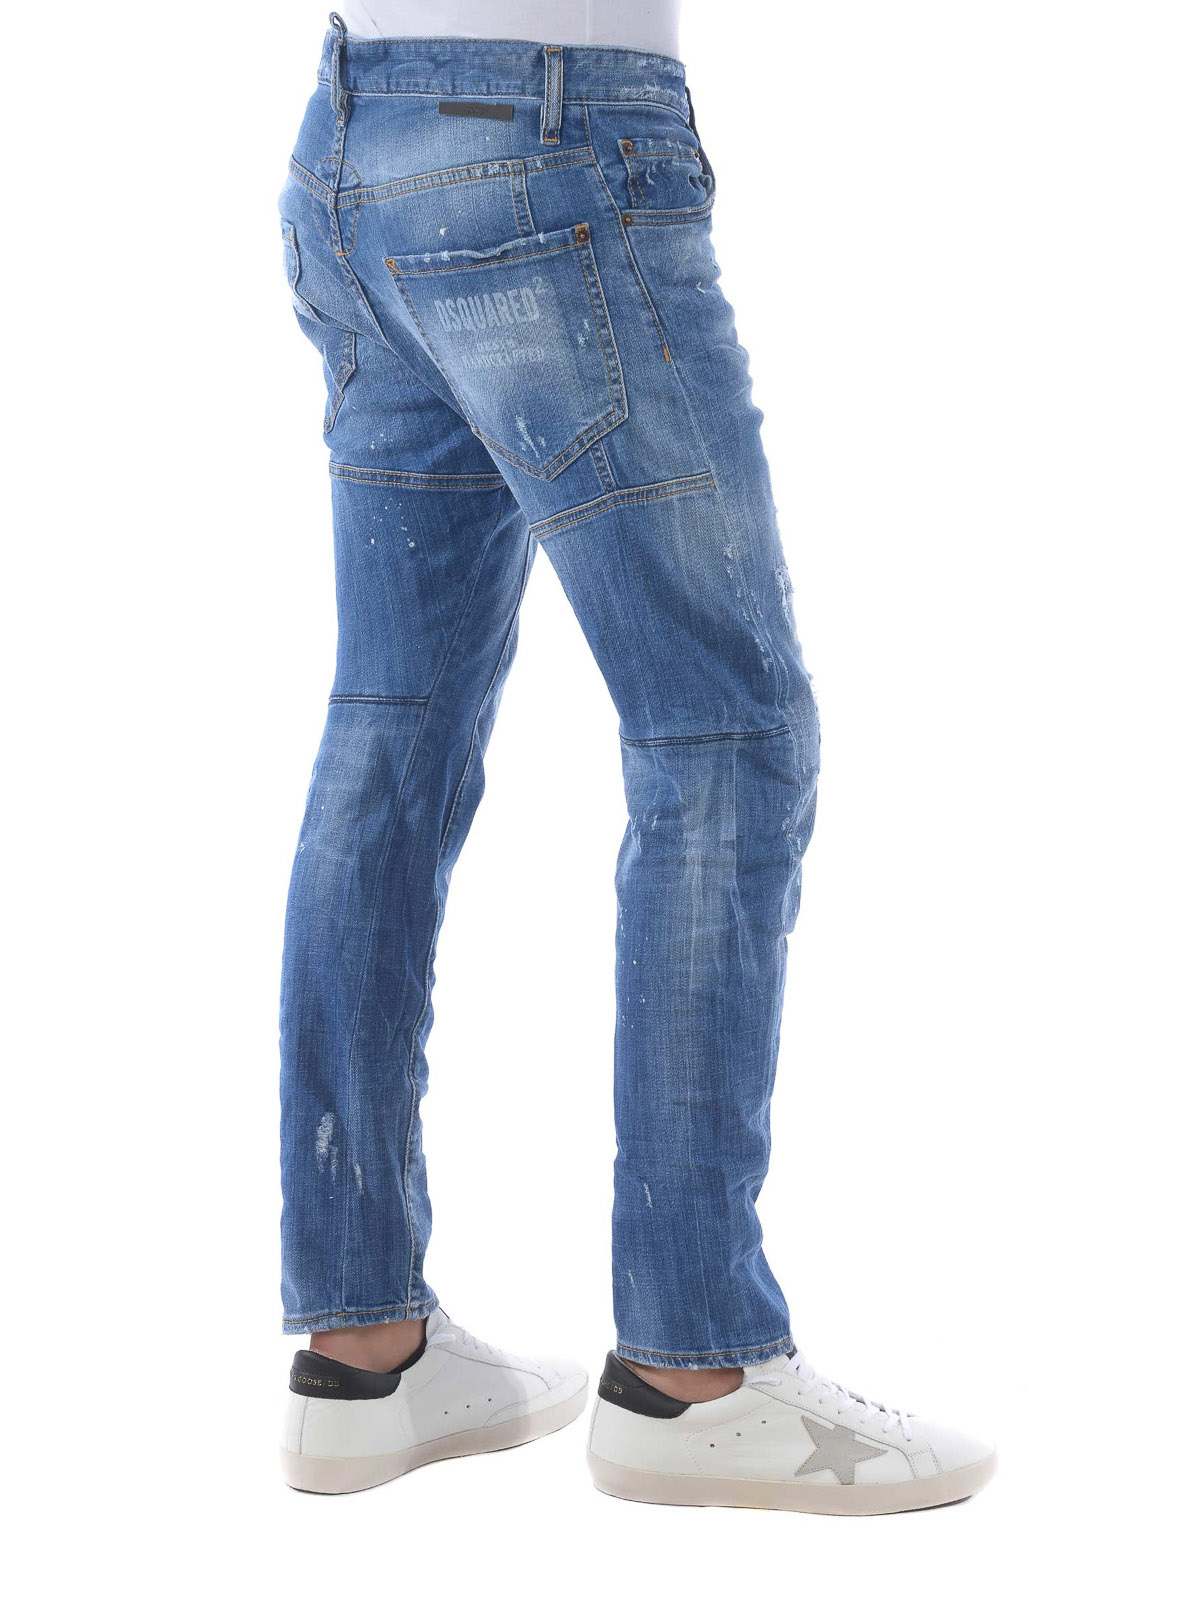 Straight leg jeans Dsquared2 - Tidy Biker jeans with patched rips